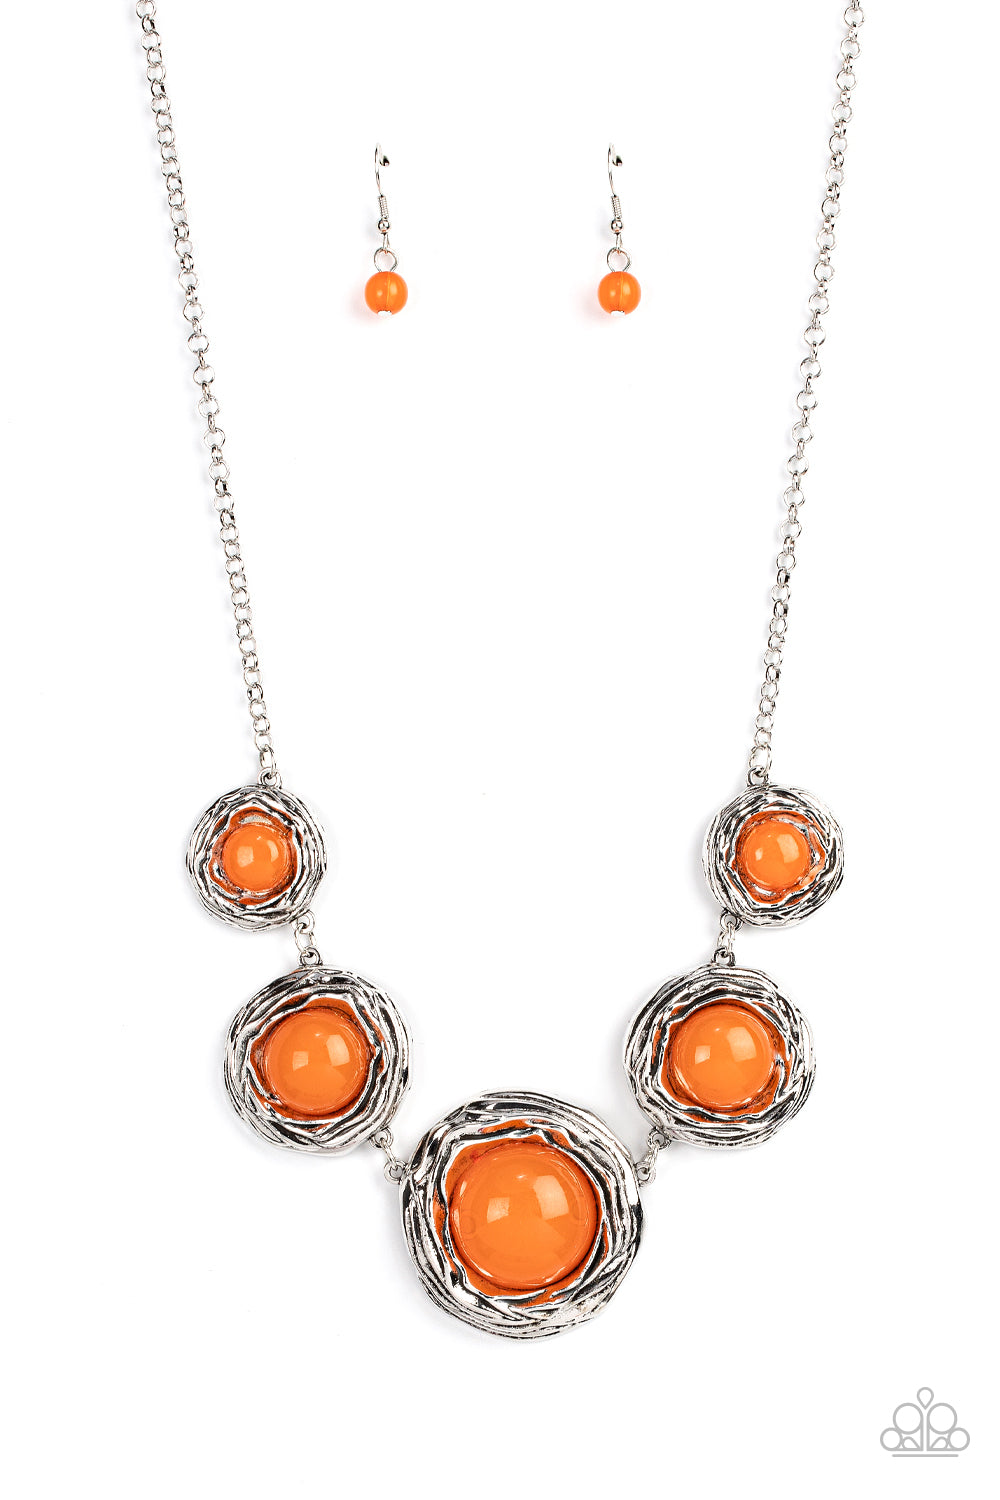 The Next NEST Thing - Orange ***COMING SOON*** - Bling With Crystal